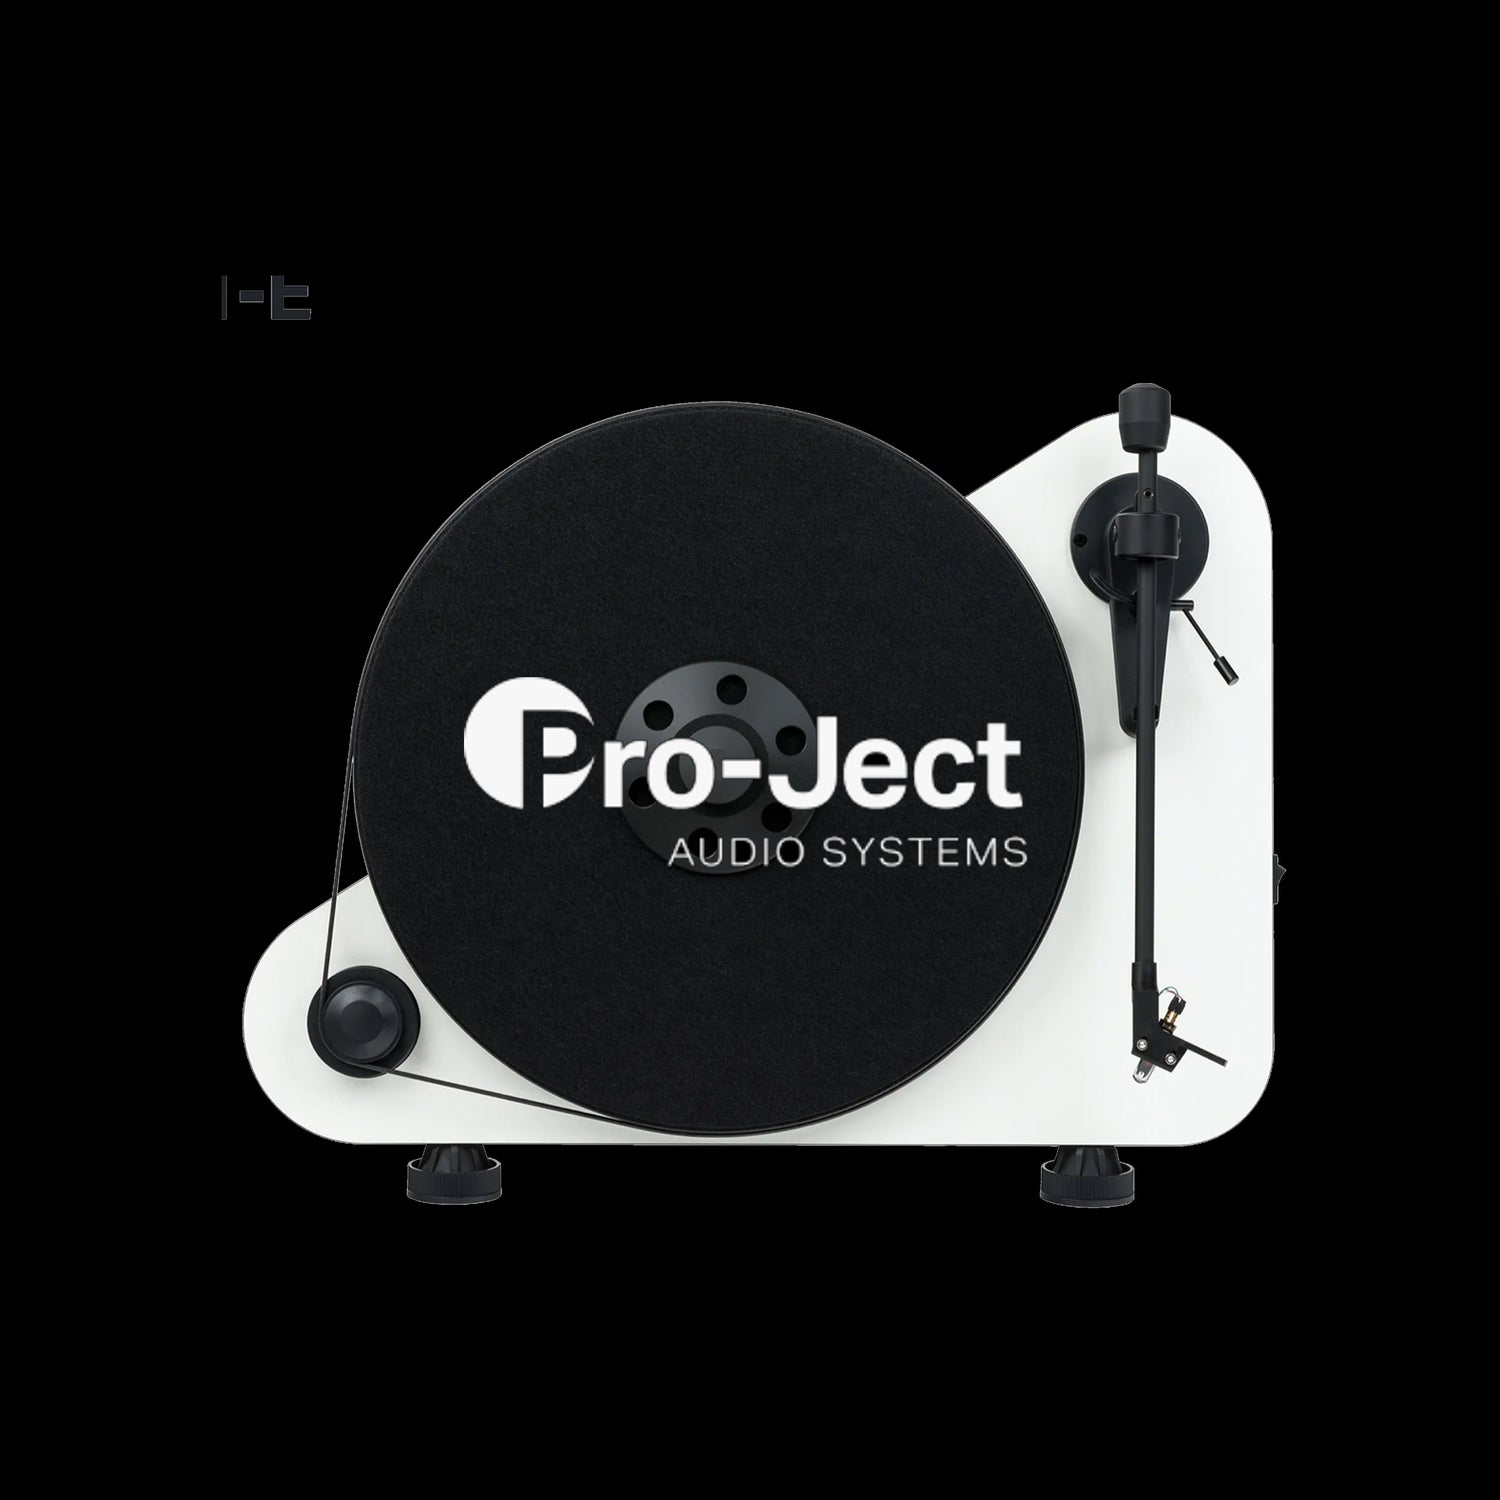 The Pro-ject Turntables